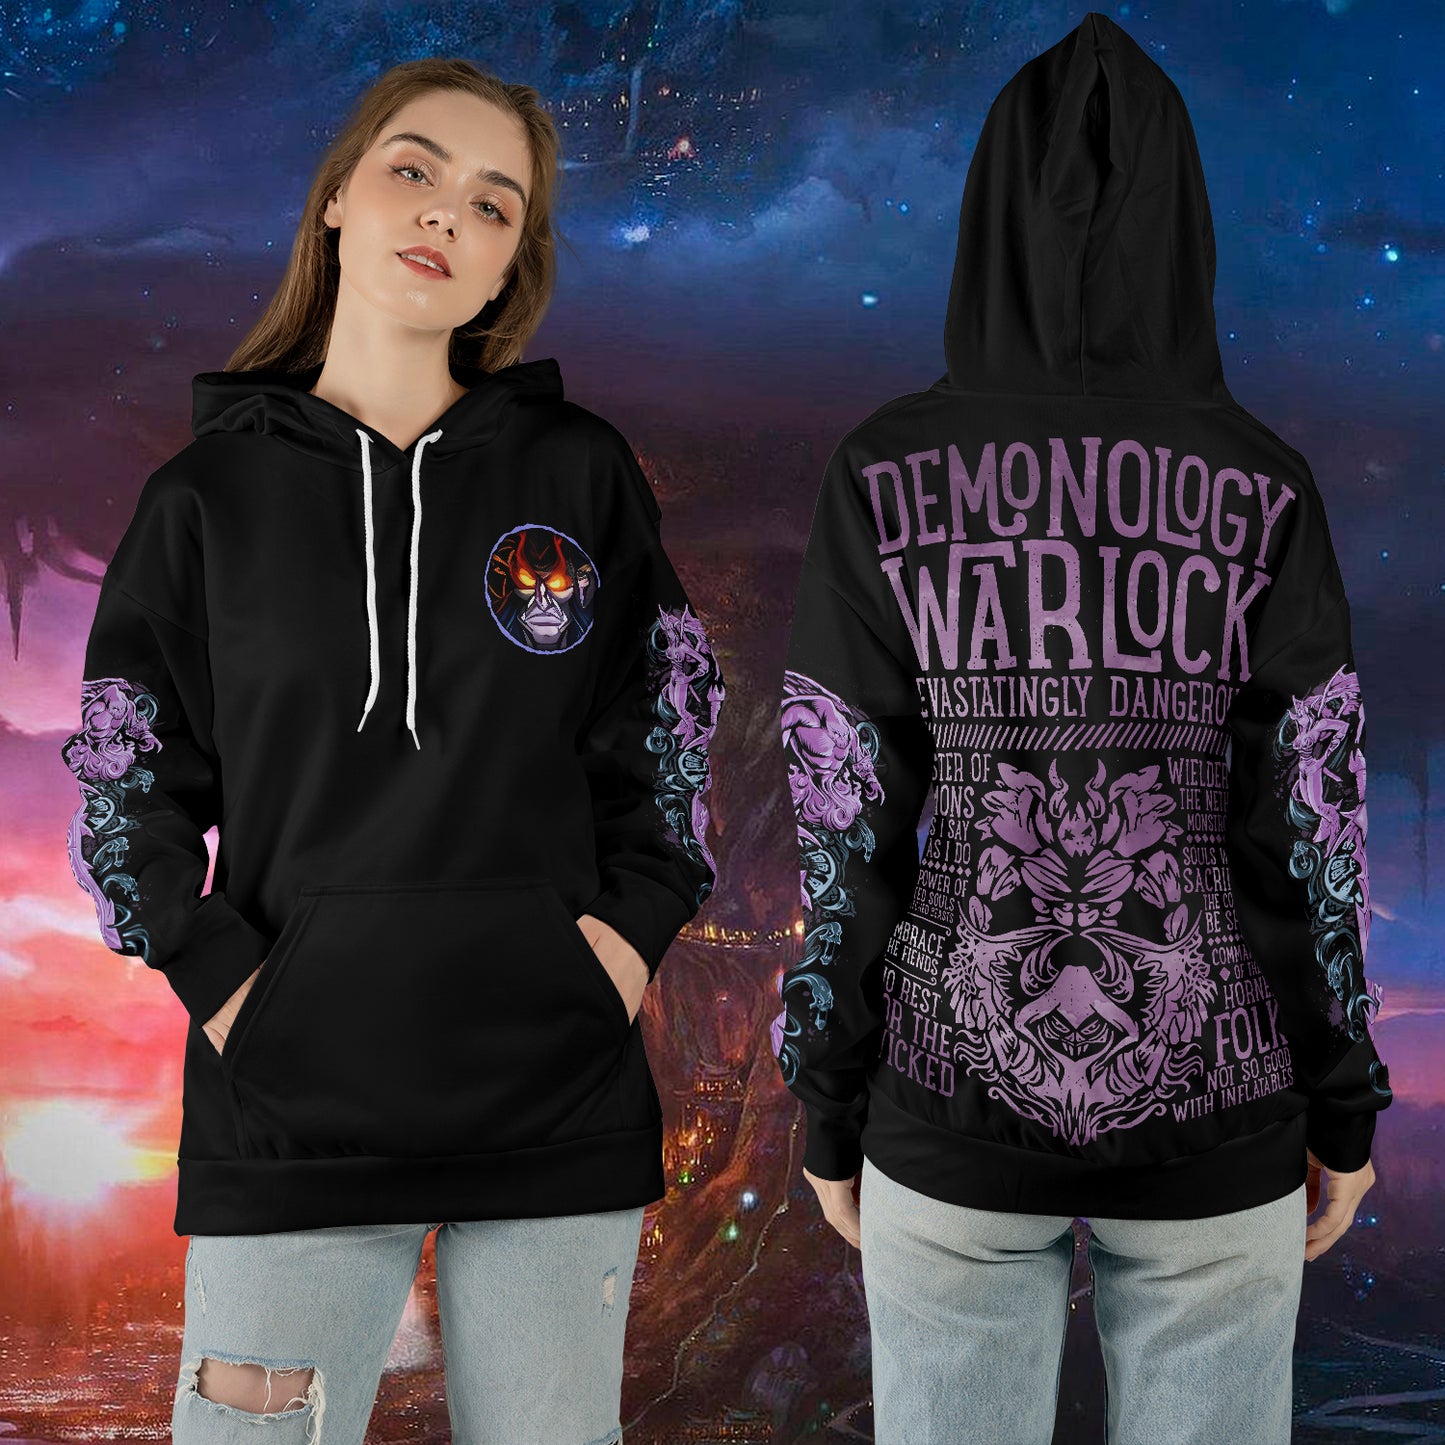 Demonology Warlock - WoW Class Guide V3 - All-over Print Hoodie